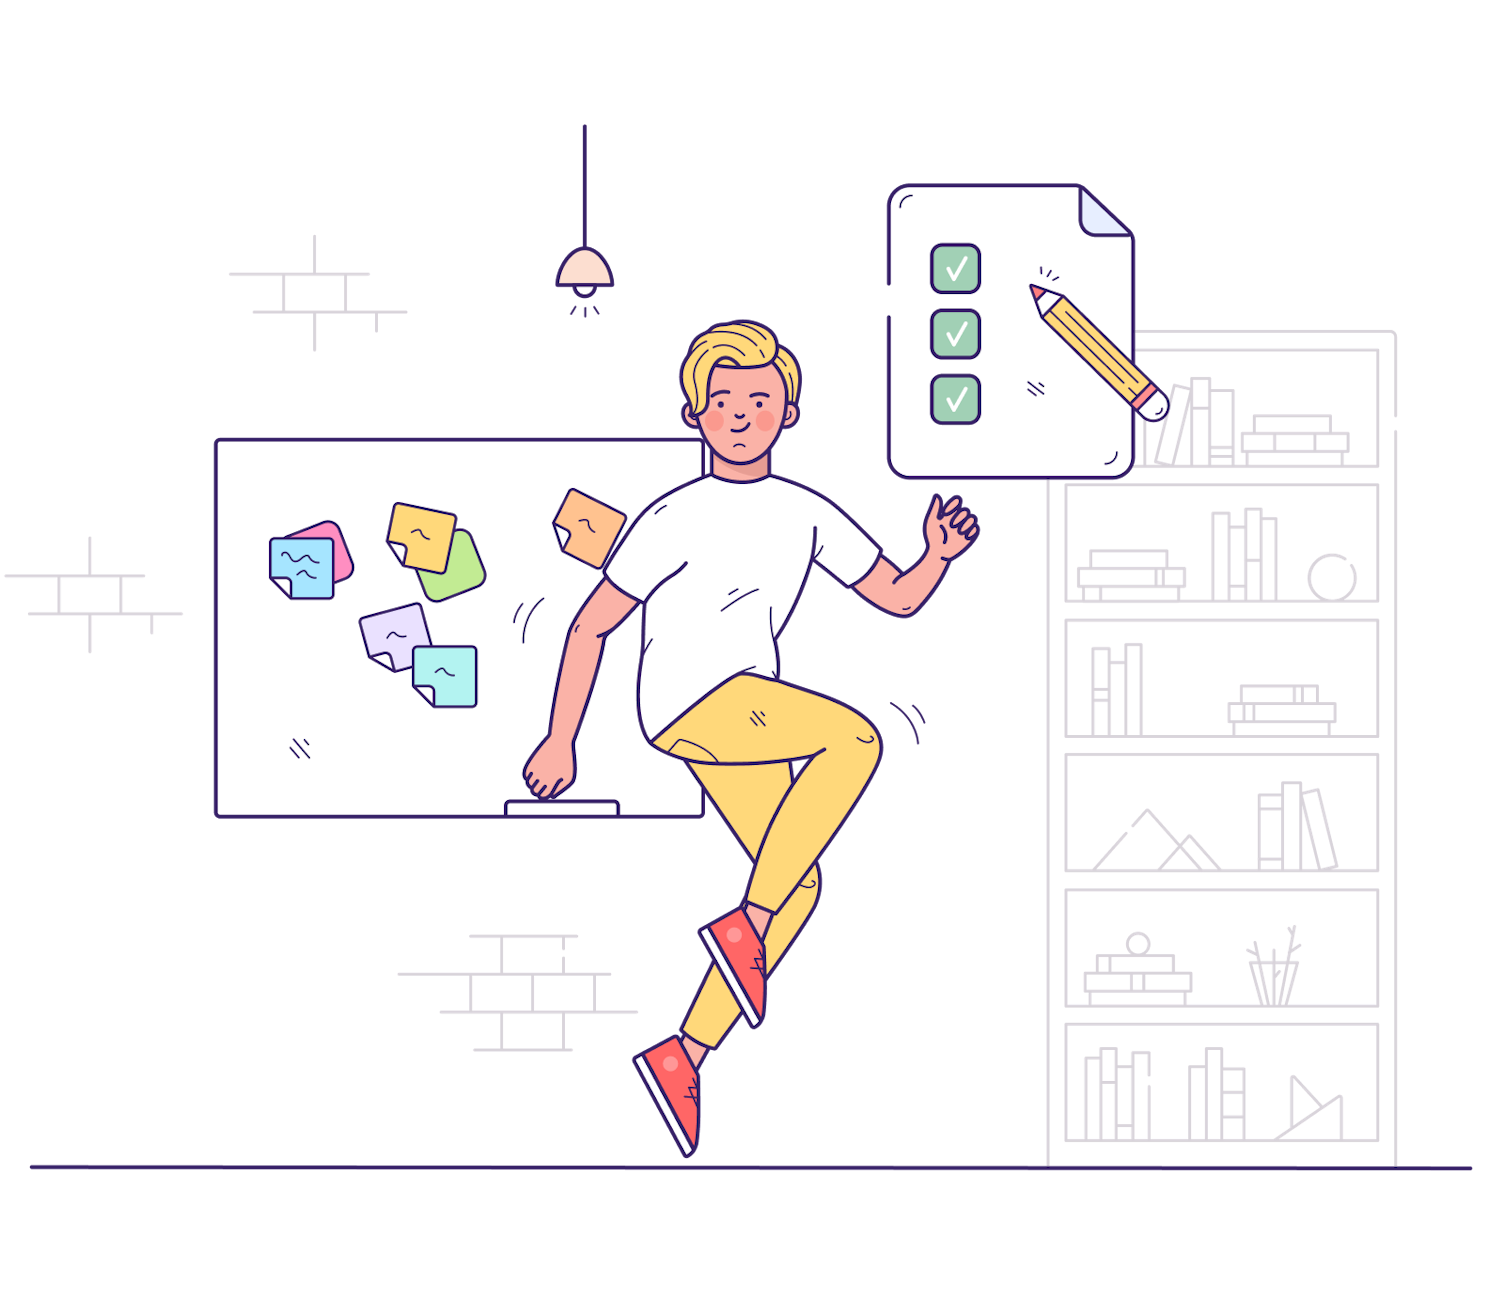 Illustration of a man jumping up, papers floating around, with one hand raised as if explaining something and a checklist with a pencil on the right.